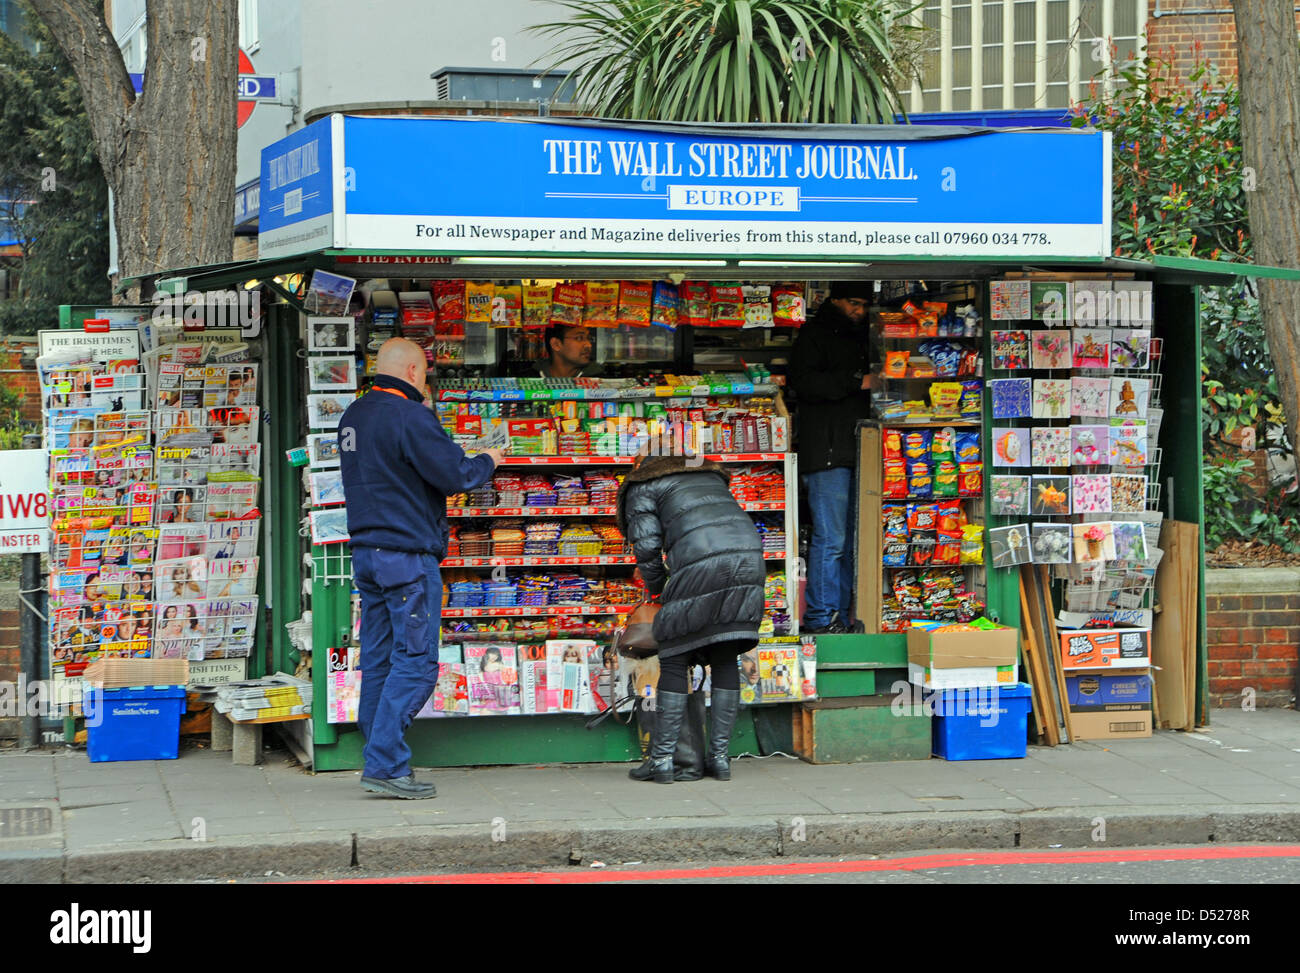 newspaper stand selling the Wall Street Journal at the St John's Wood Underground train station in London UK Stock Photo